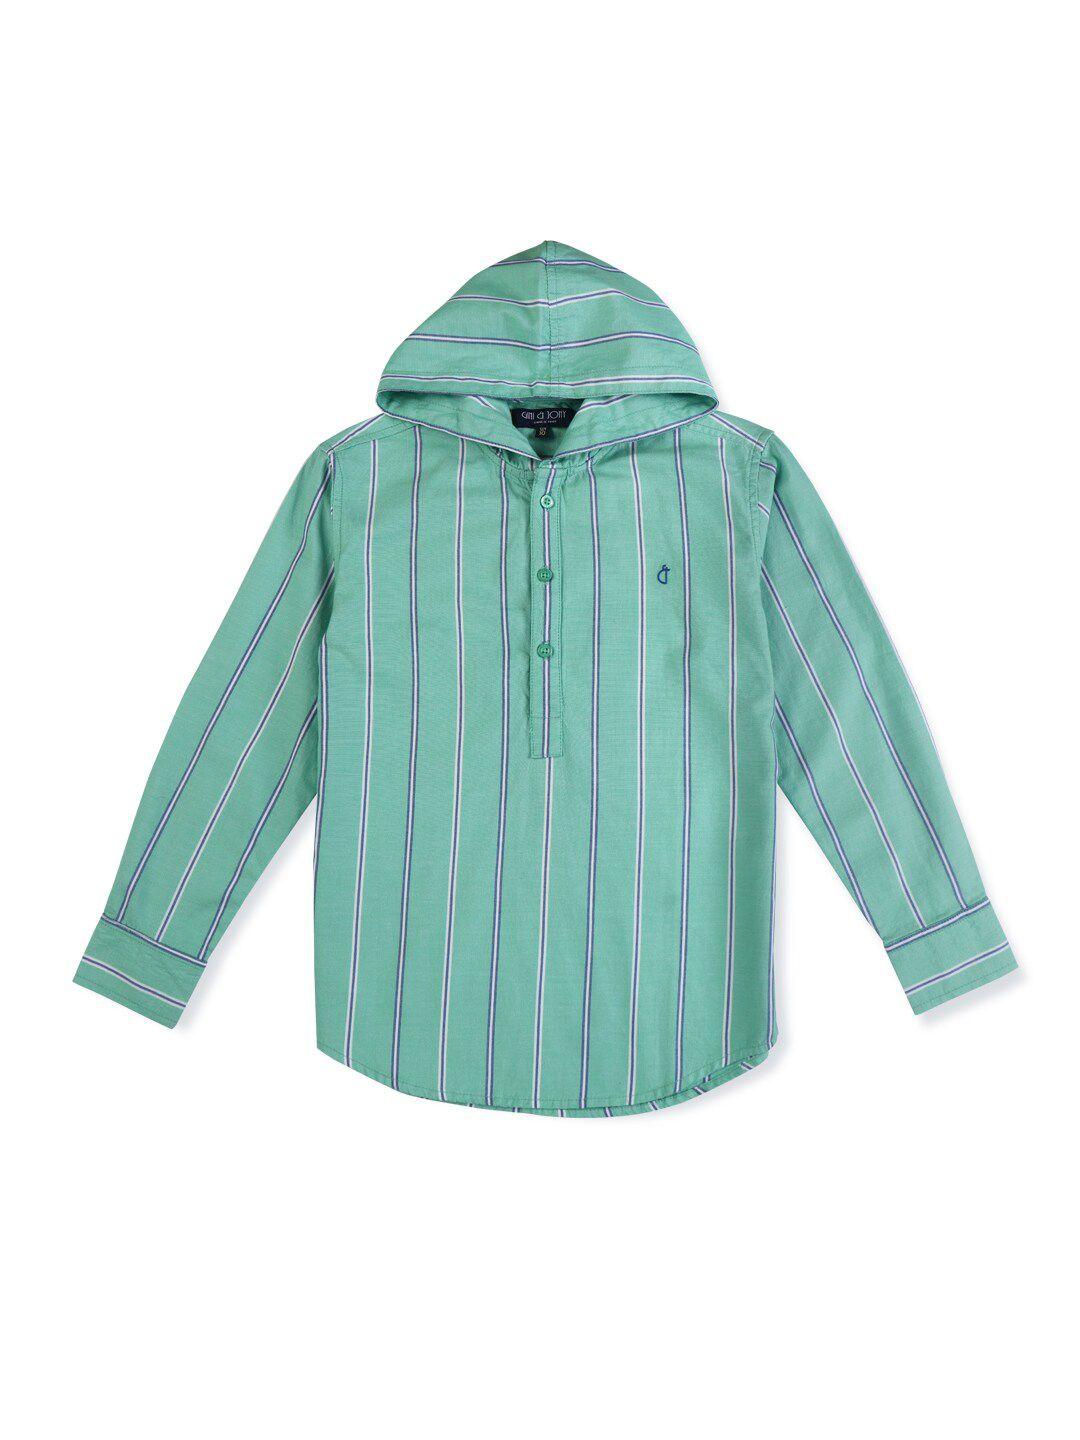 gini-and-jony-boys-vertical-striped-hoody-neck-cotton-casual-shirt